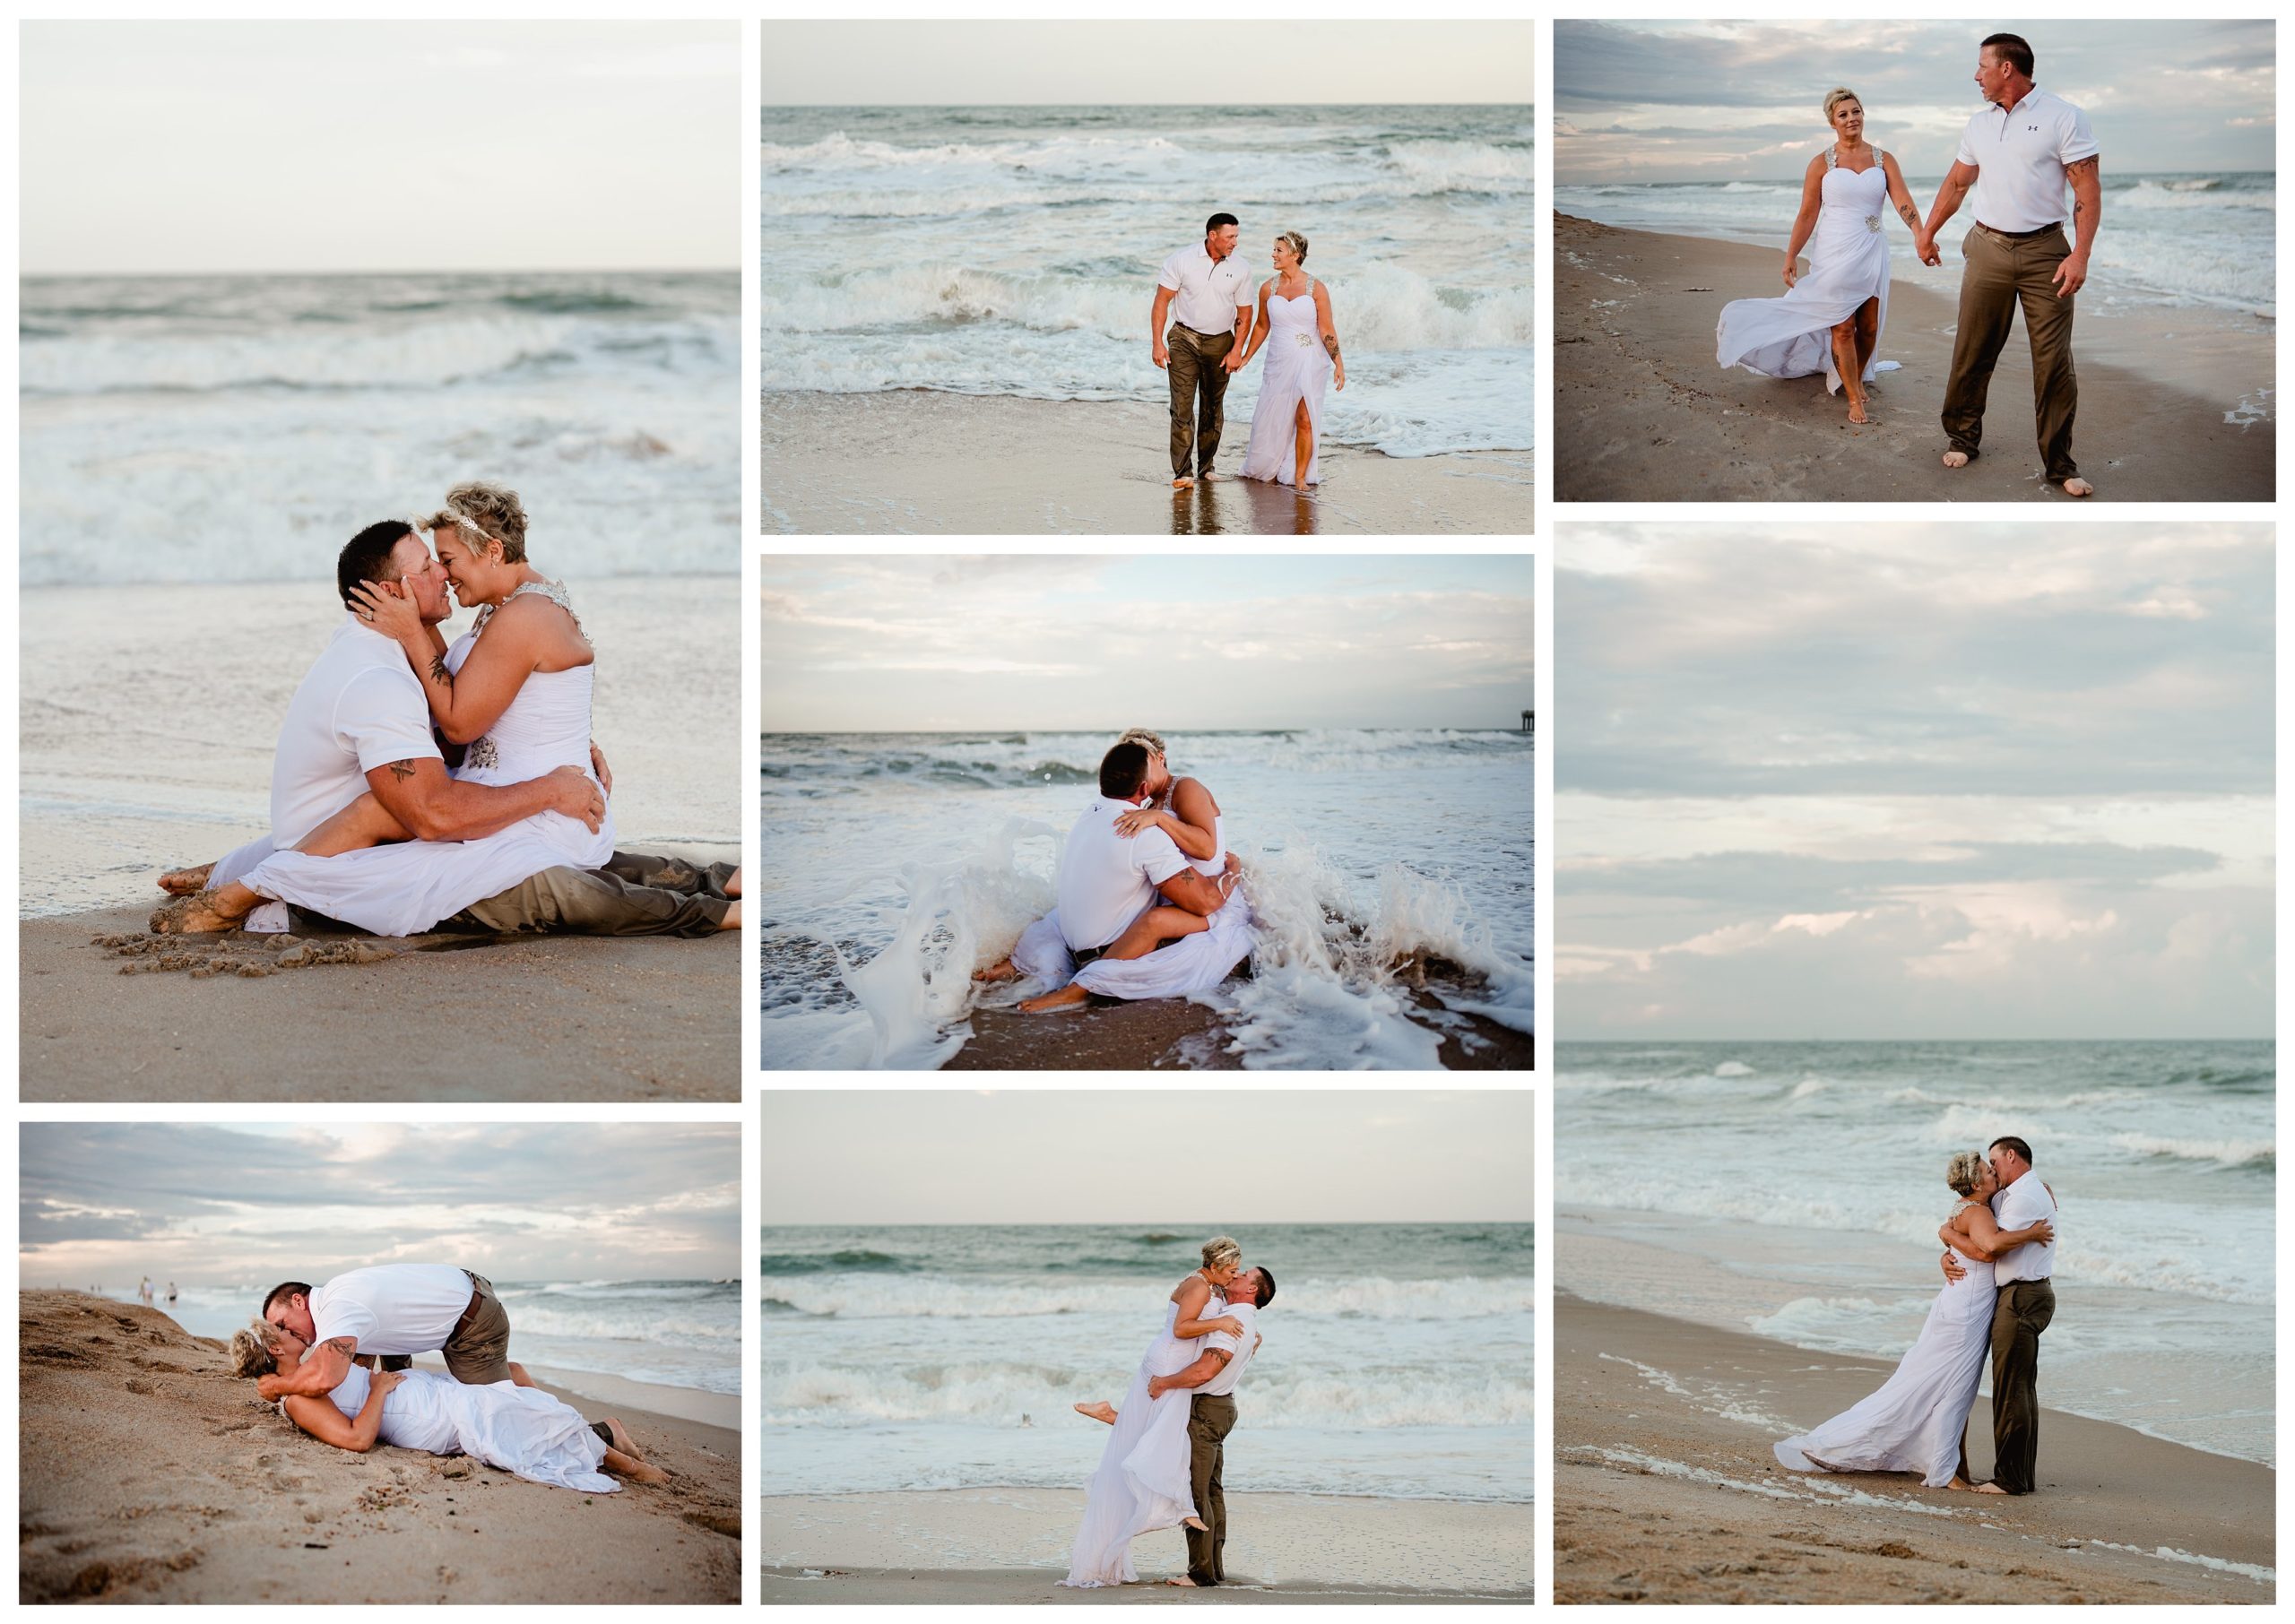 Wedding couple photos taken in the beach water while trashing the dress.